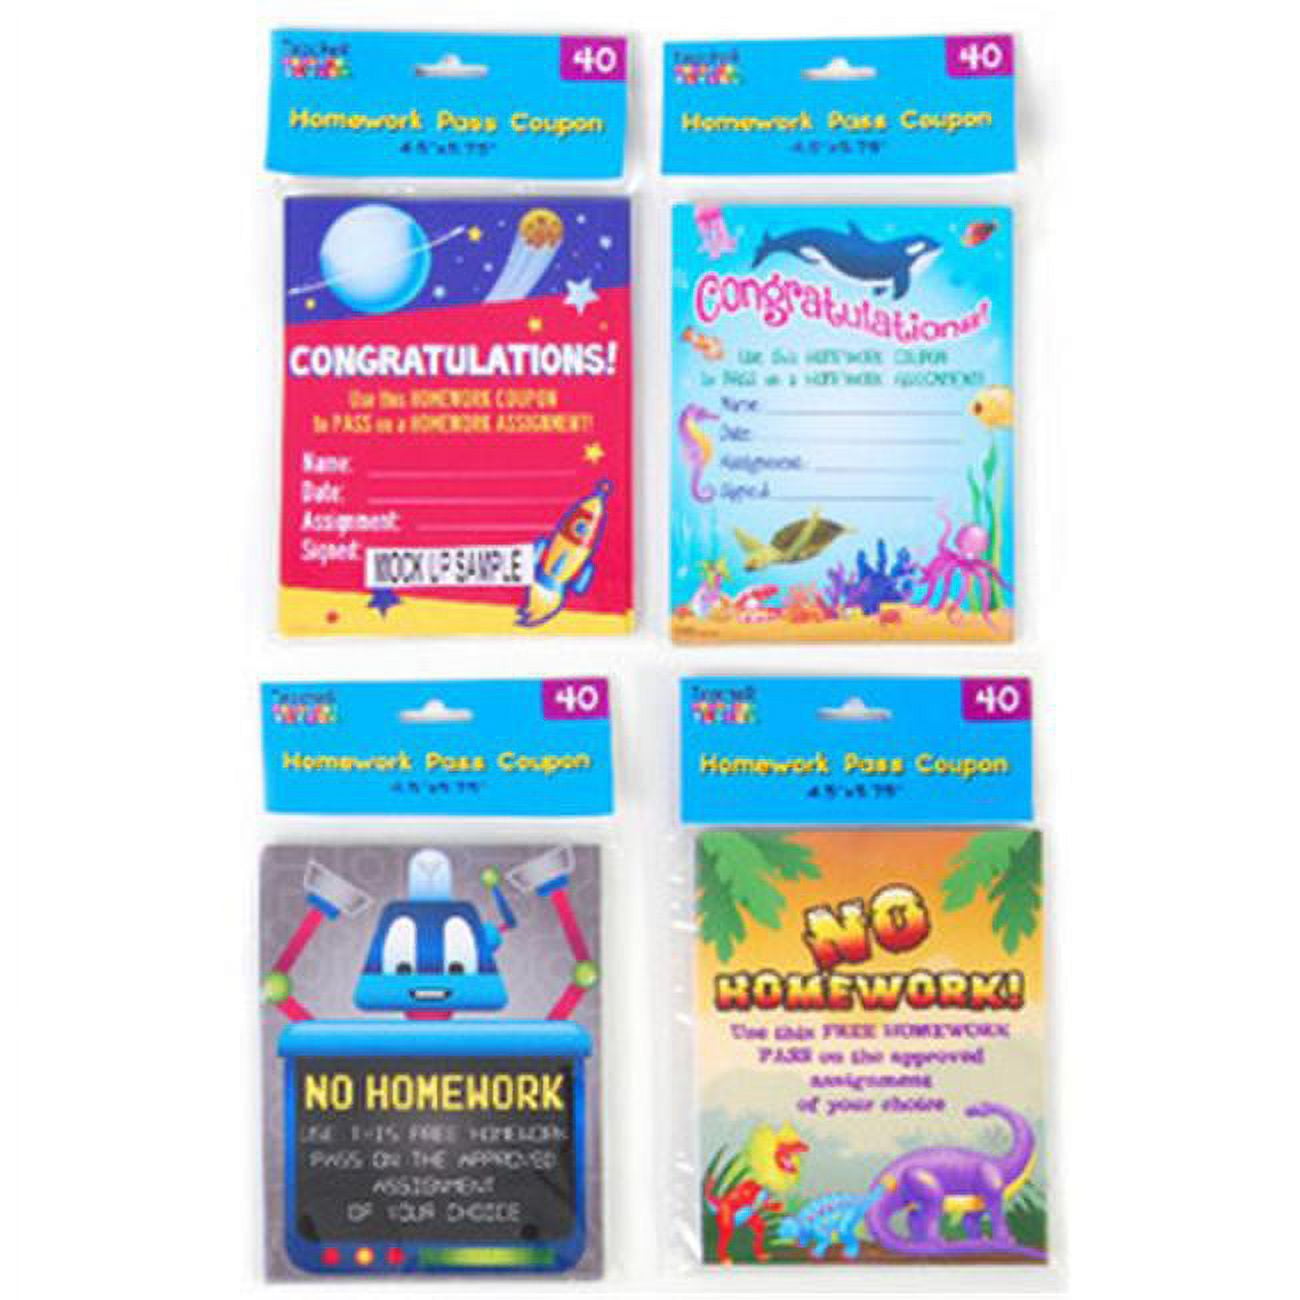 PartyPros Homework Pass Coupon Sheets Case of 48